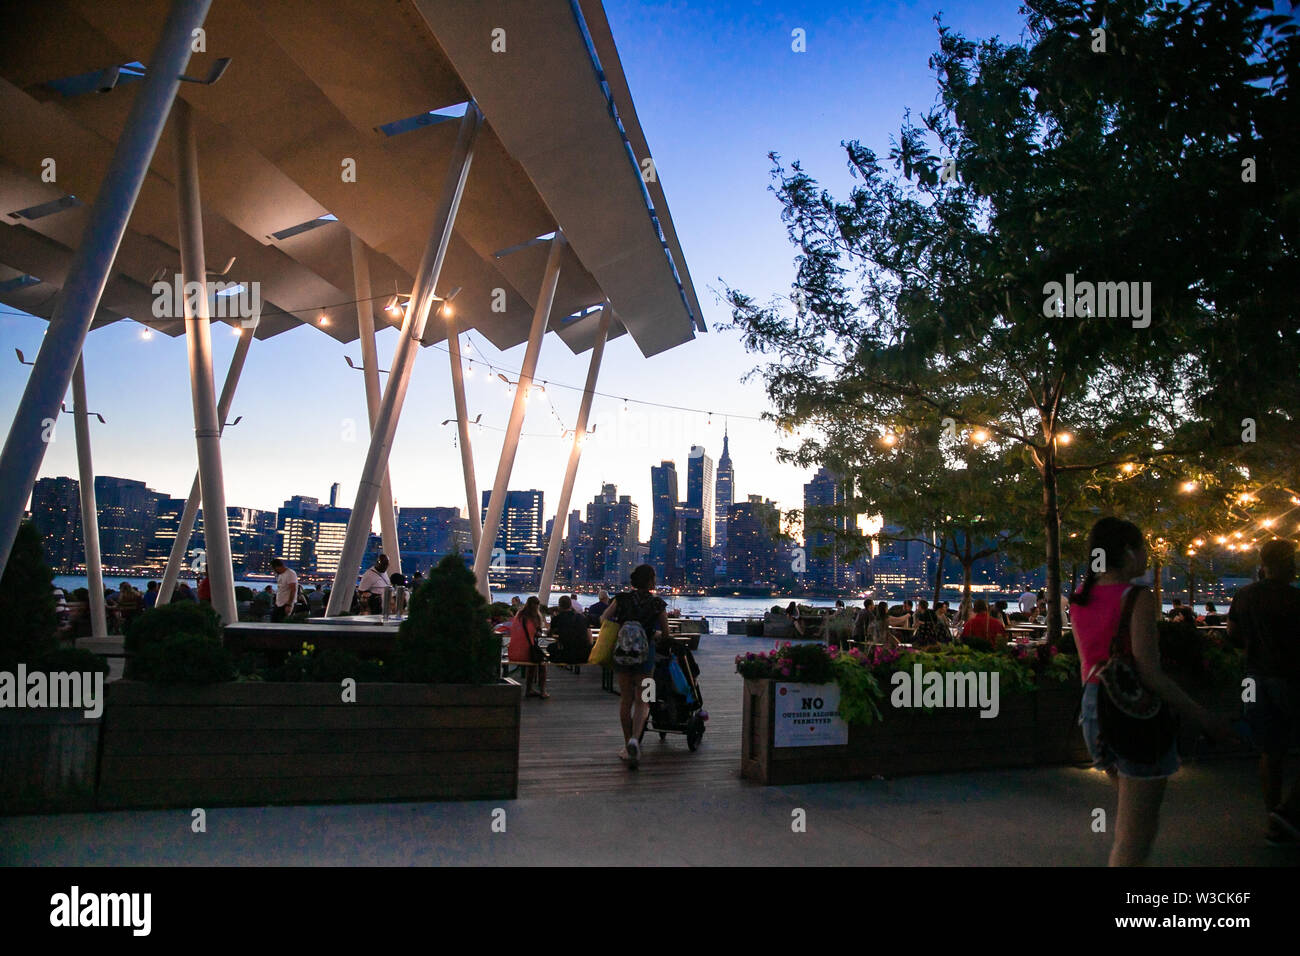 LONG ISLAND CITY, NEW YORK - JULY 13, 2019:  View at Gantry Plaza State Park on a summer evening with people visible. Stock Photo